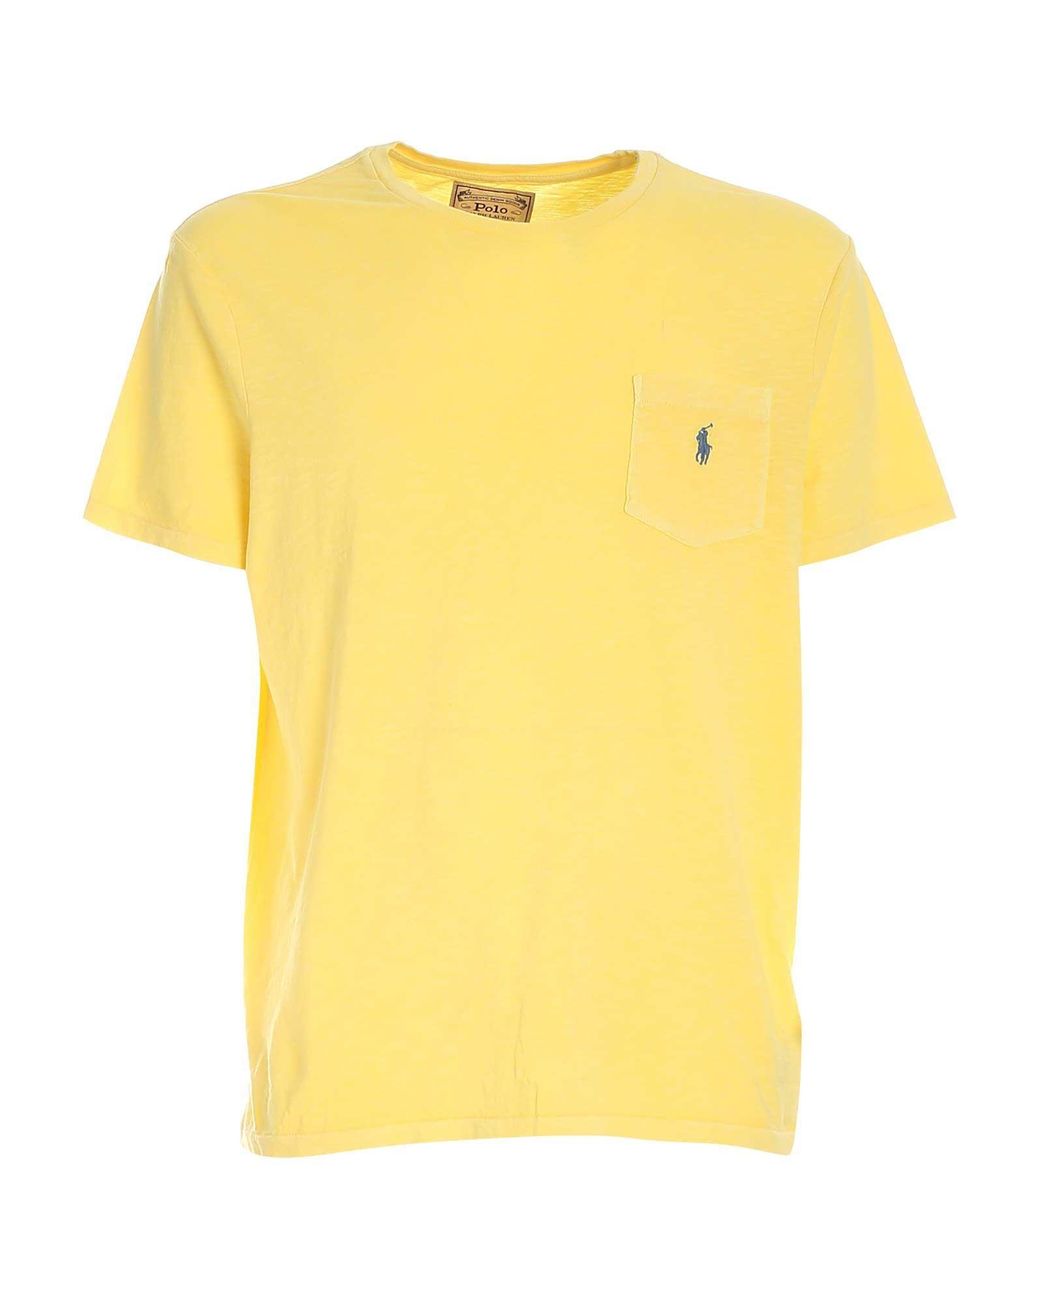 Polo Ralph Lauren Cotton Patch Pocket T-shirt in Yellow for Men - Lyst